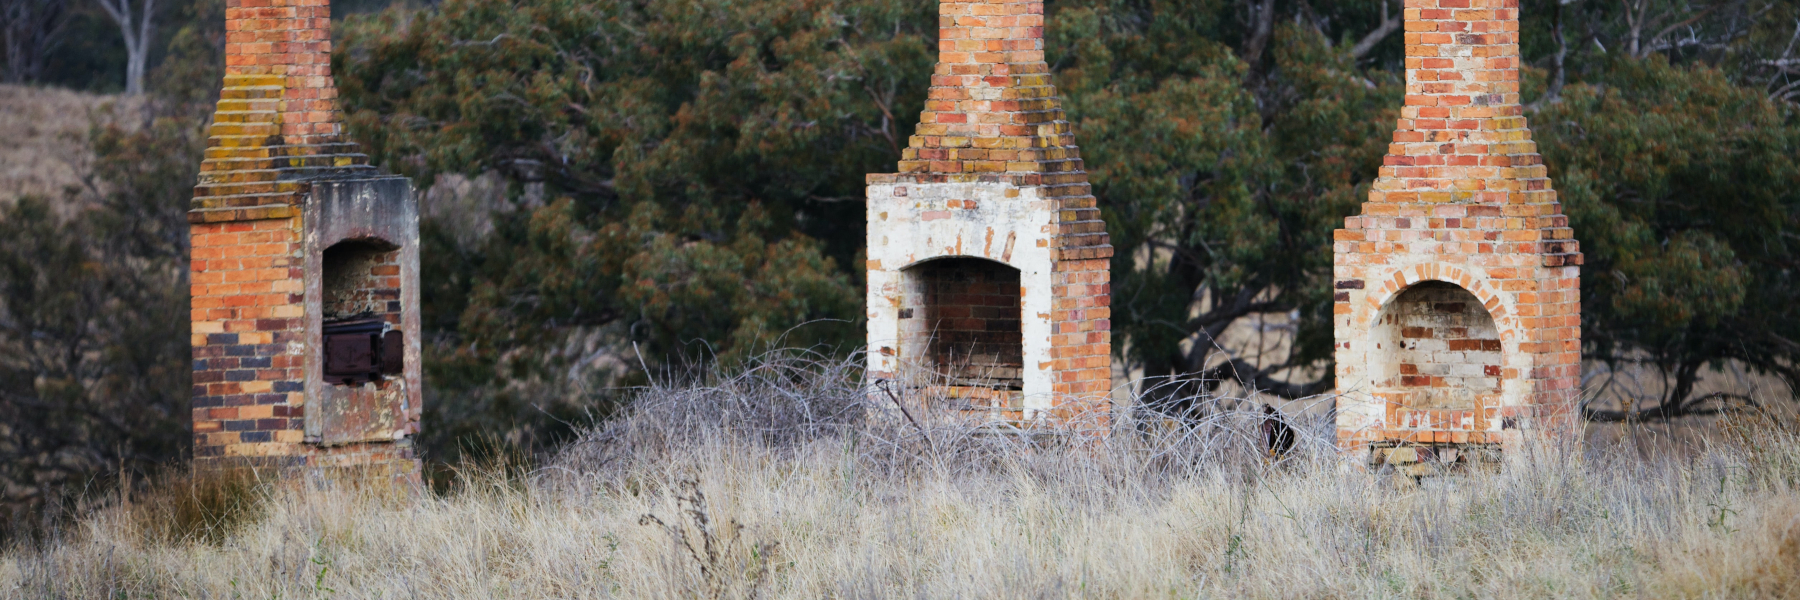 Masonry Fireplaces in a field